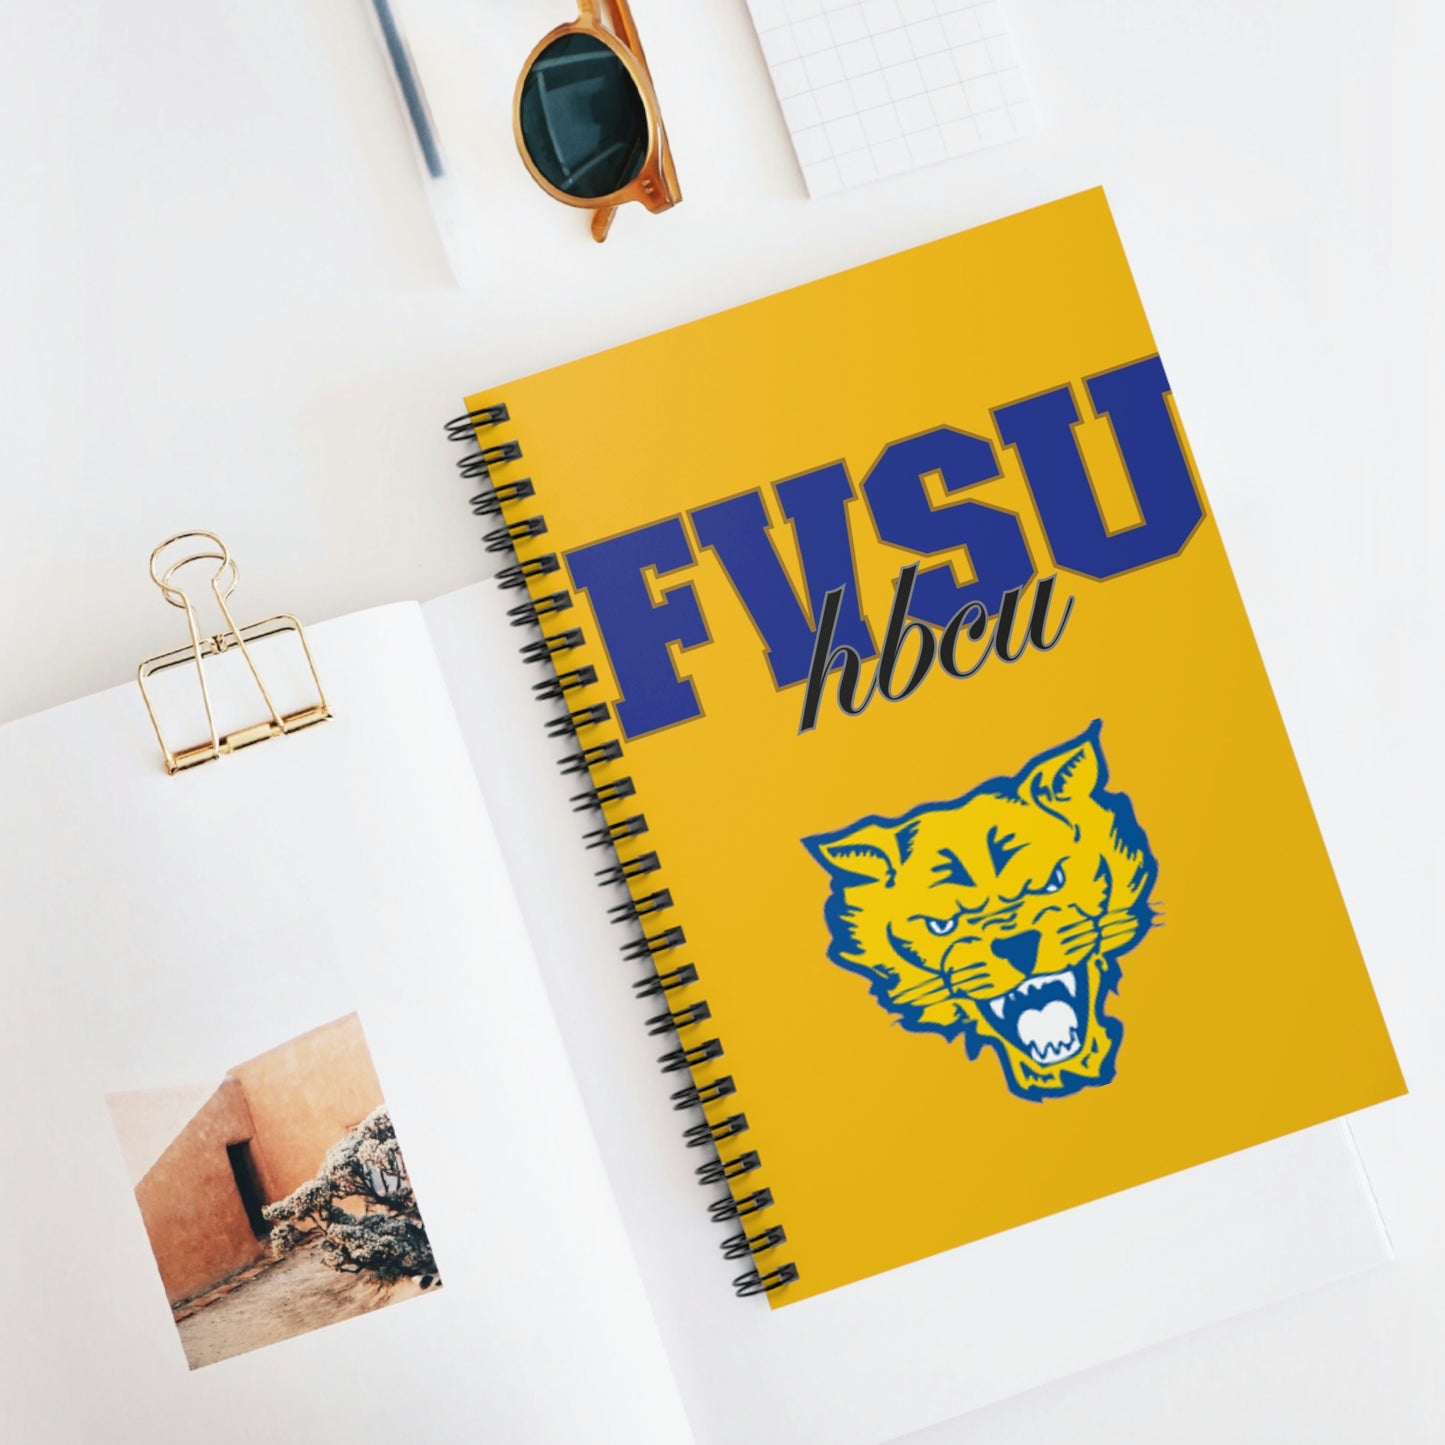 HBCU Love (Fort Valley State University/ Spiral Notebook - Ruled Line)